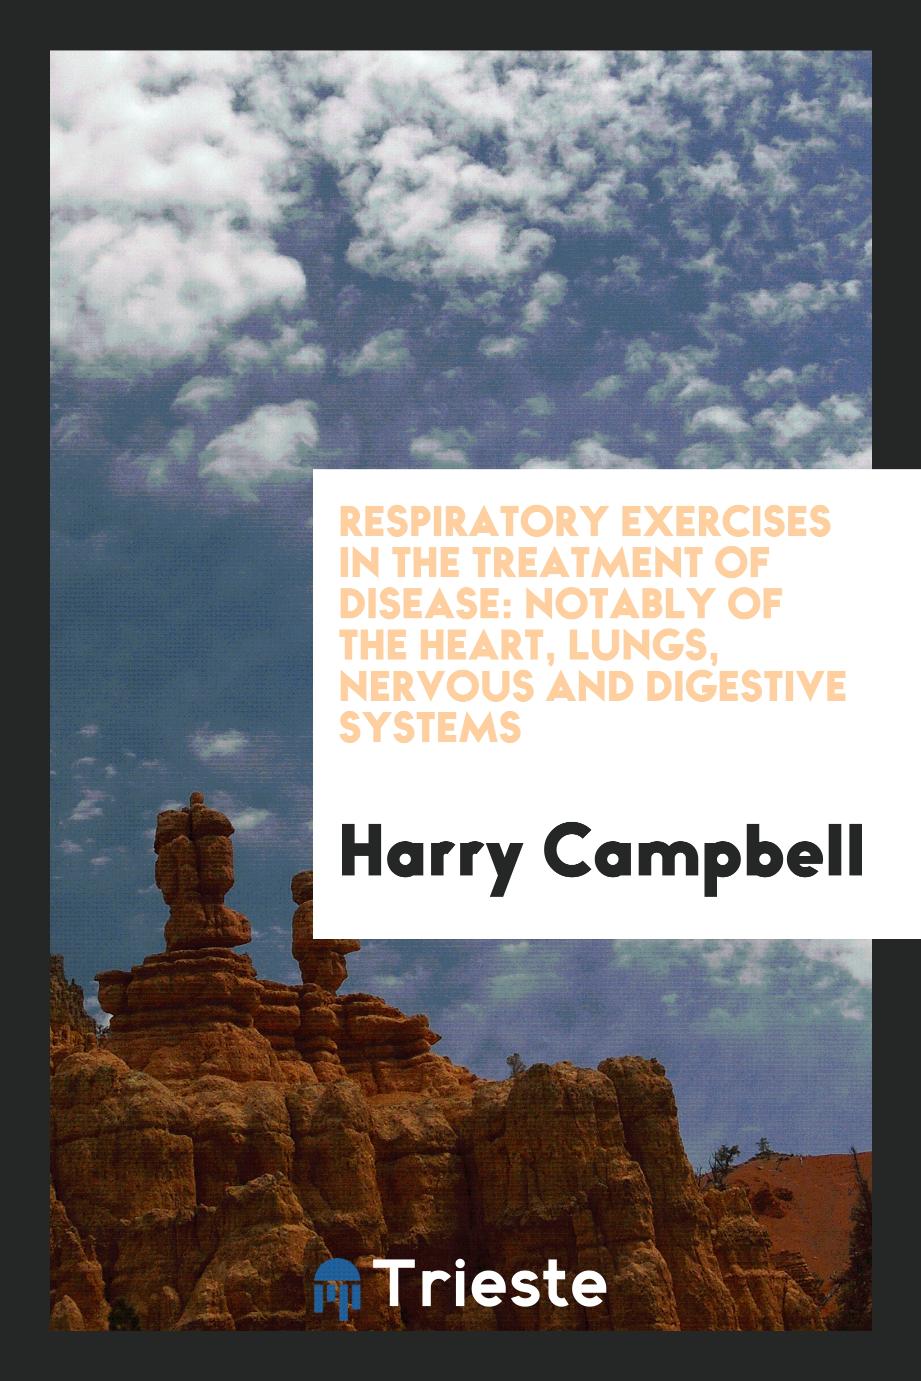 Respiratory Exercises in the Treatment of Disease: Notably of the Heart, Lungs, Nervous and Digestive Systems